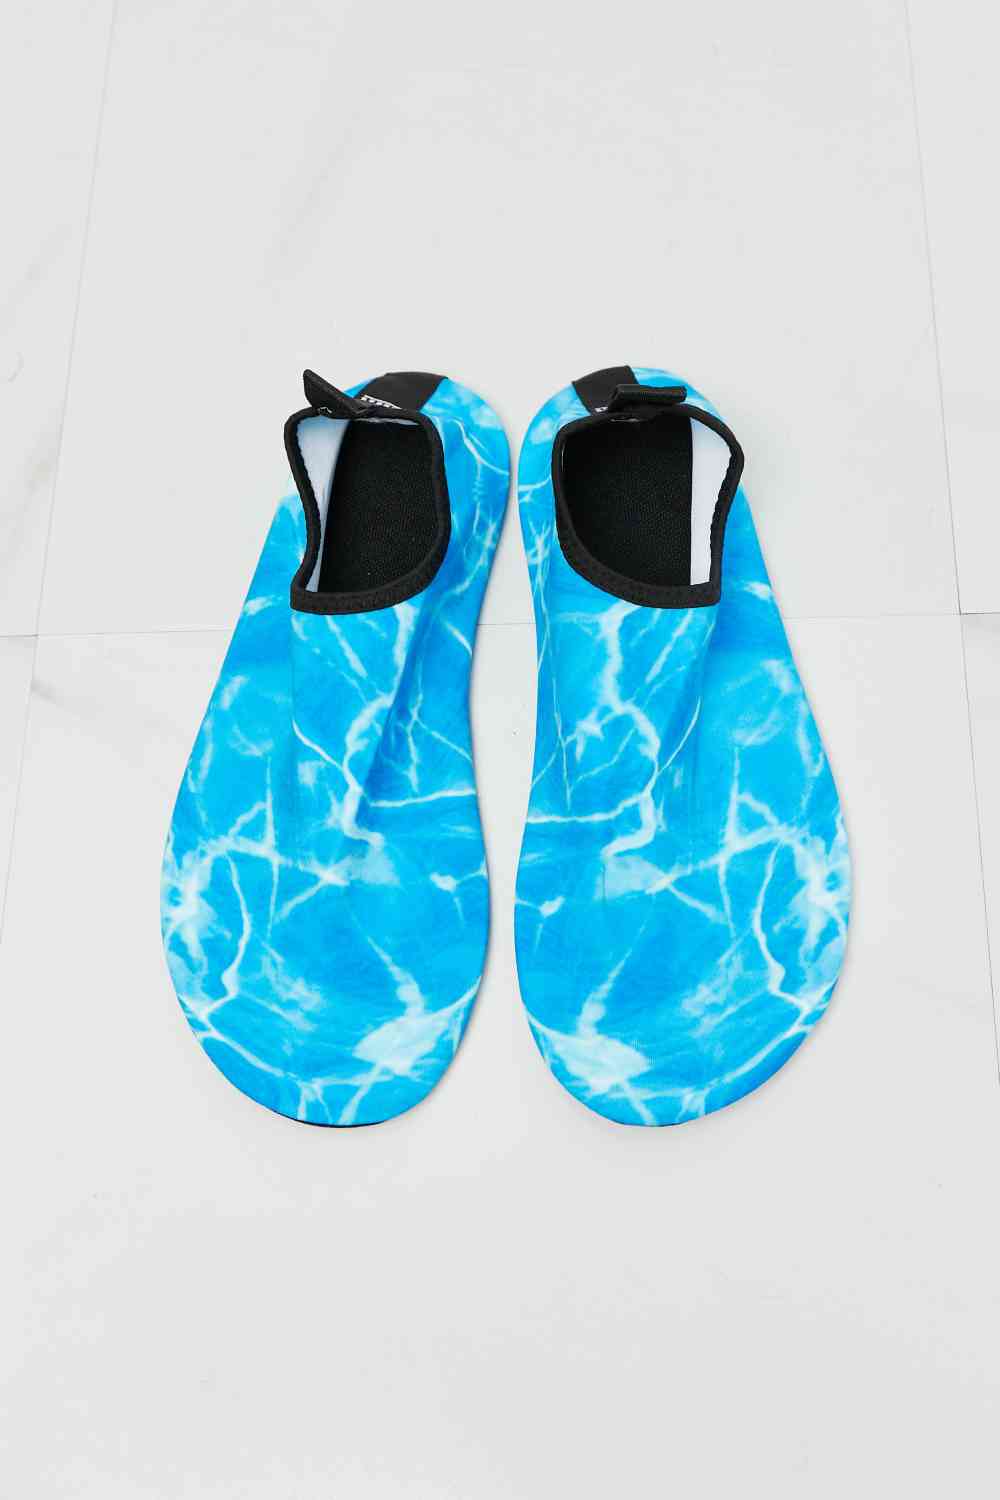 MMshoes On The Shore Water Shoes in Sky Blue No 5